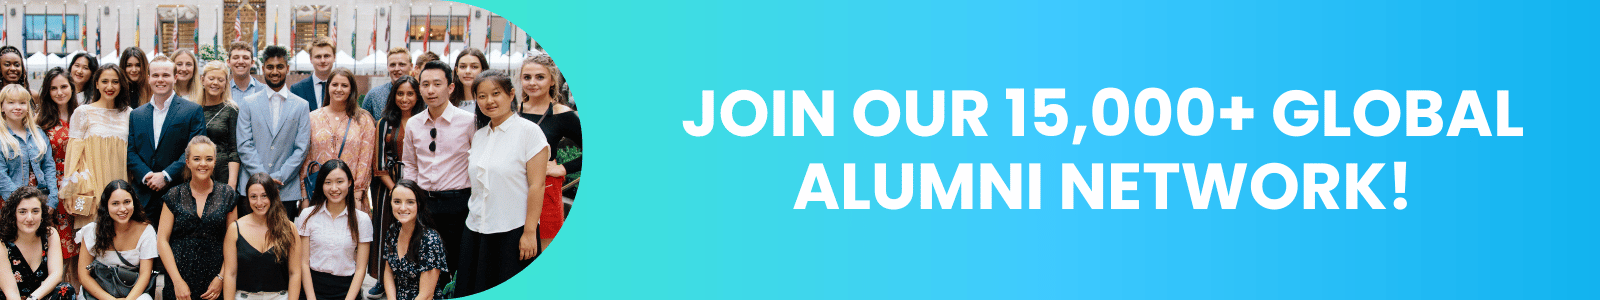 Join out 15,000+ global alumni